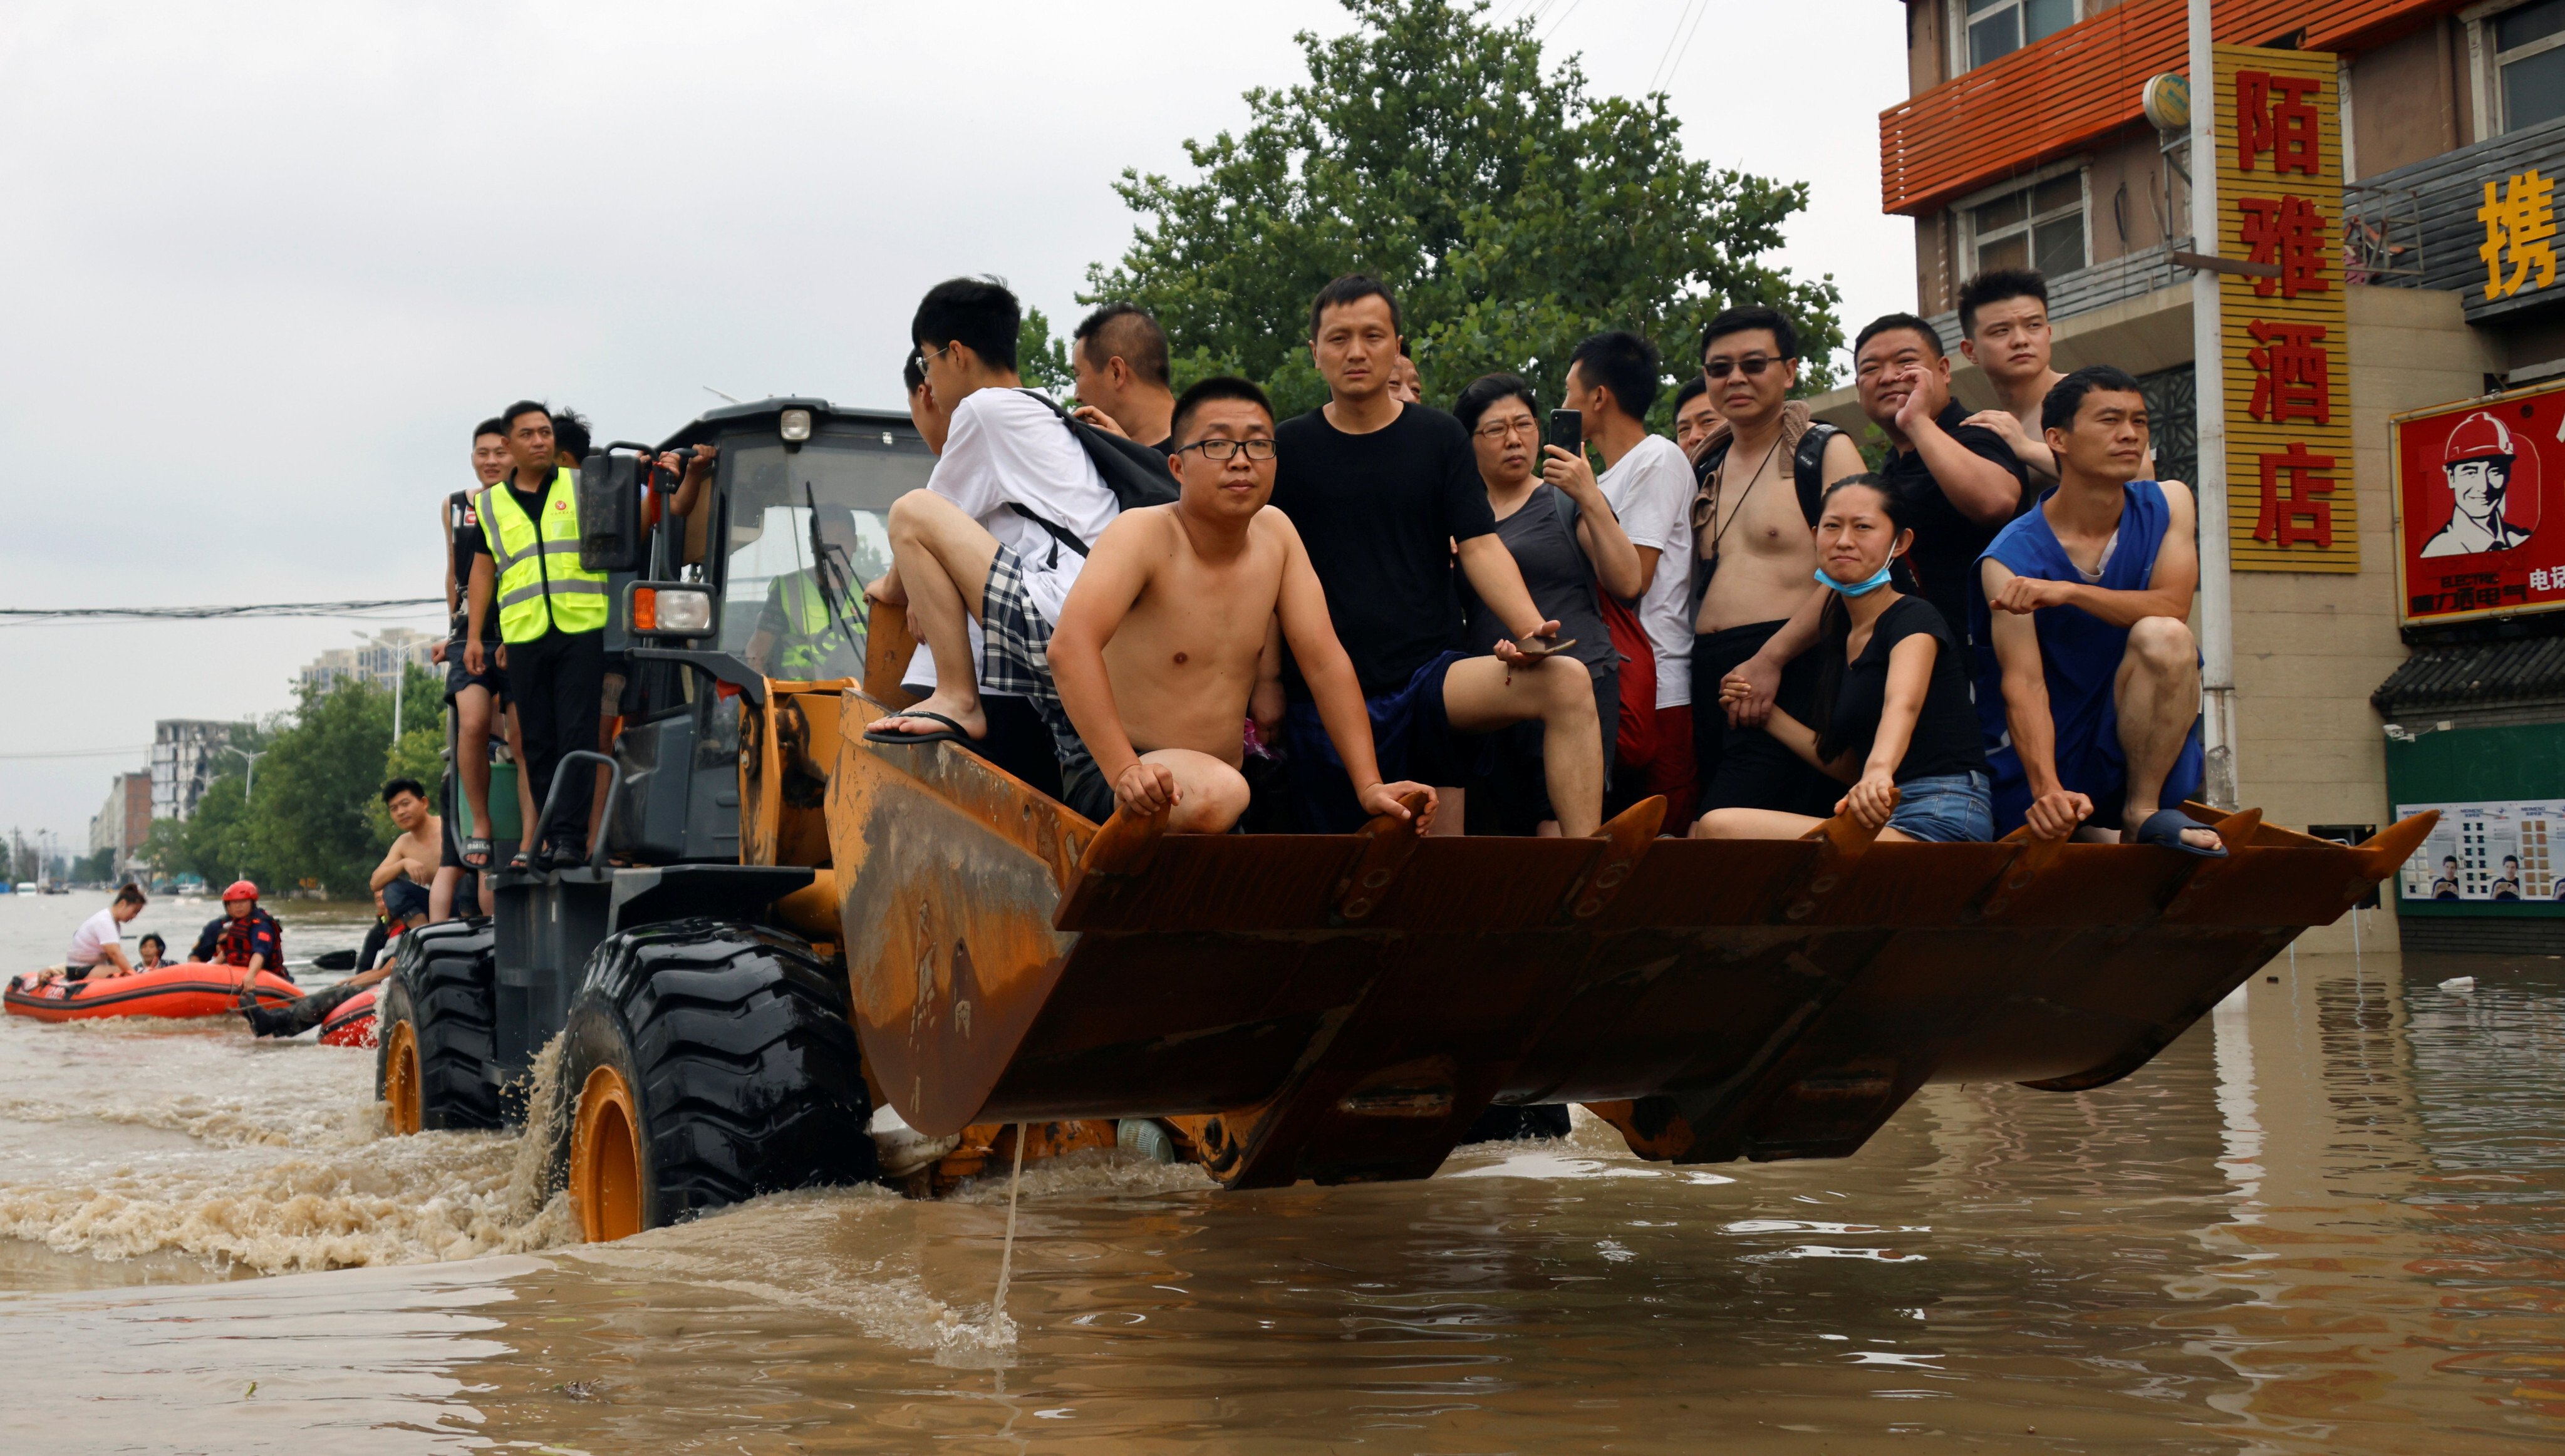 People ride a front loader as they make their way through a flooded road following heavy rainfall in Zhengzhou, Henan province, on July 22. Photo: Reuters